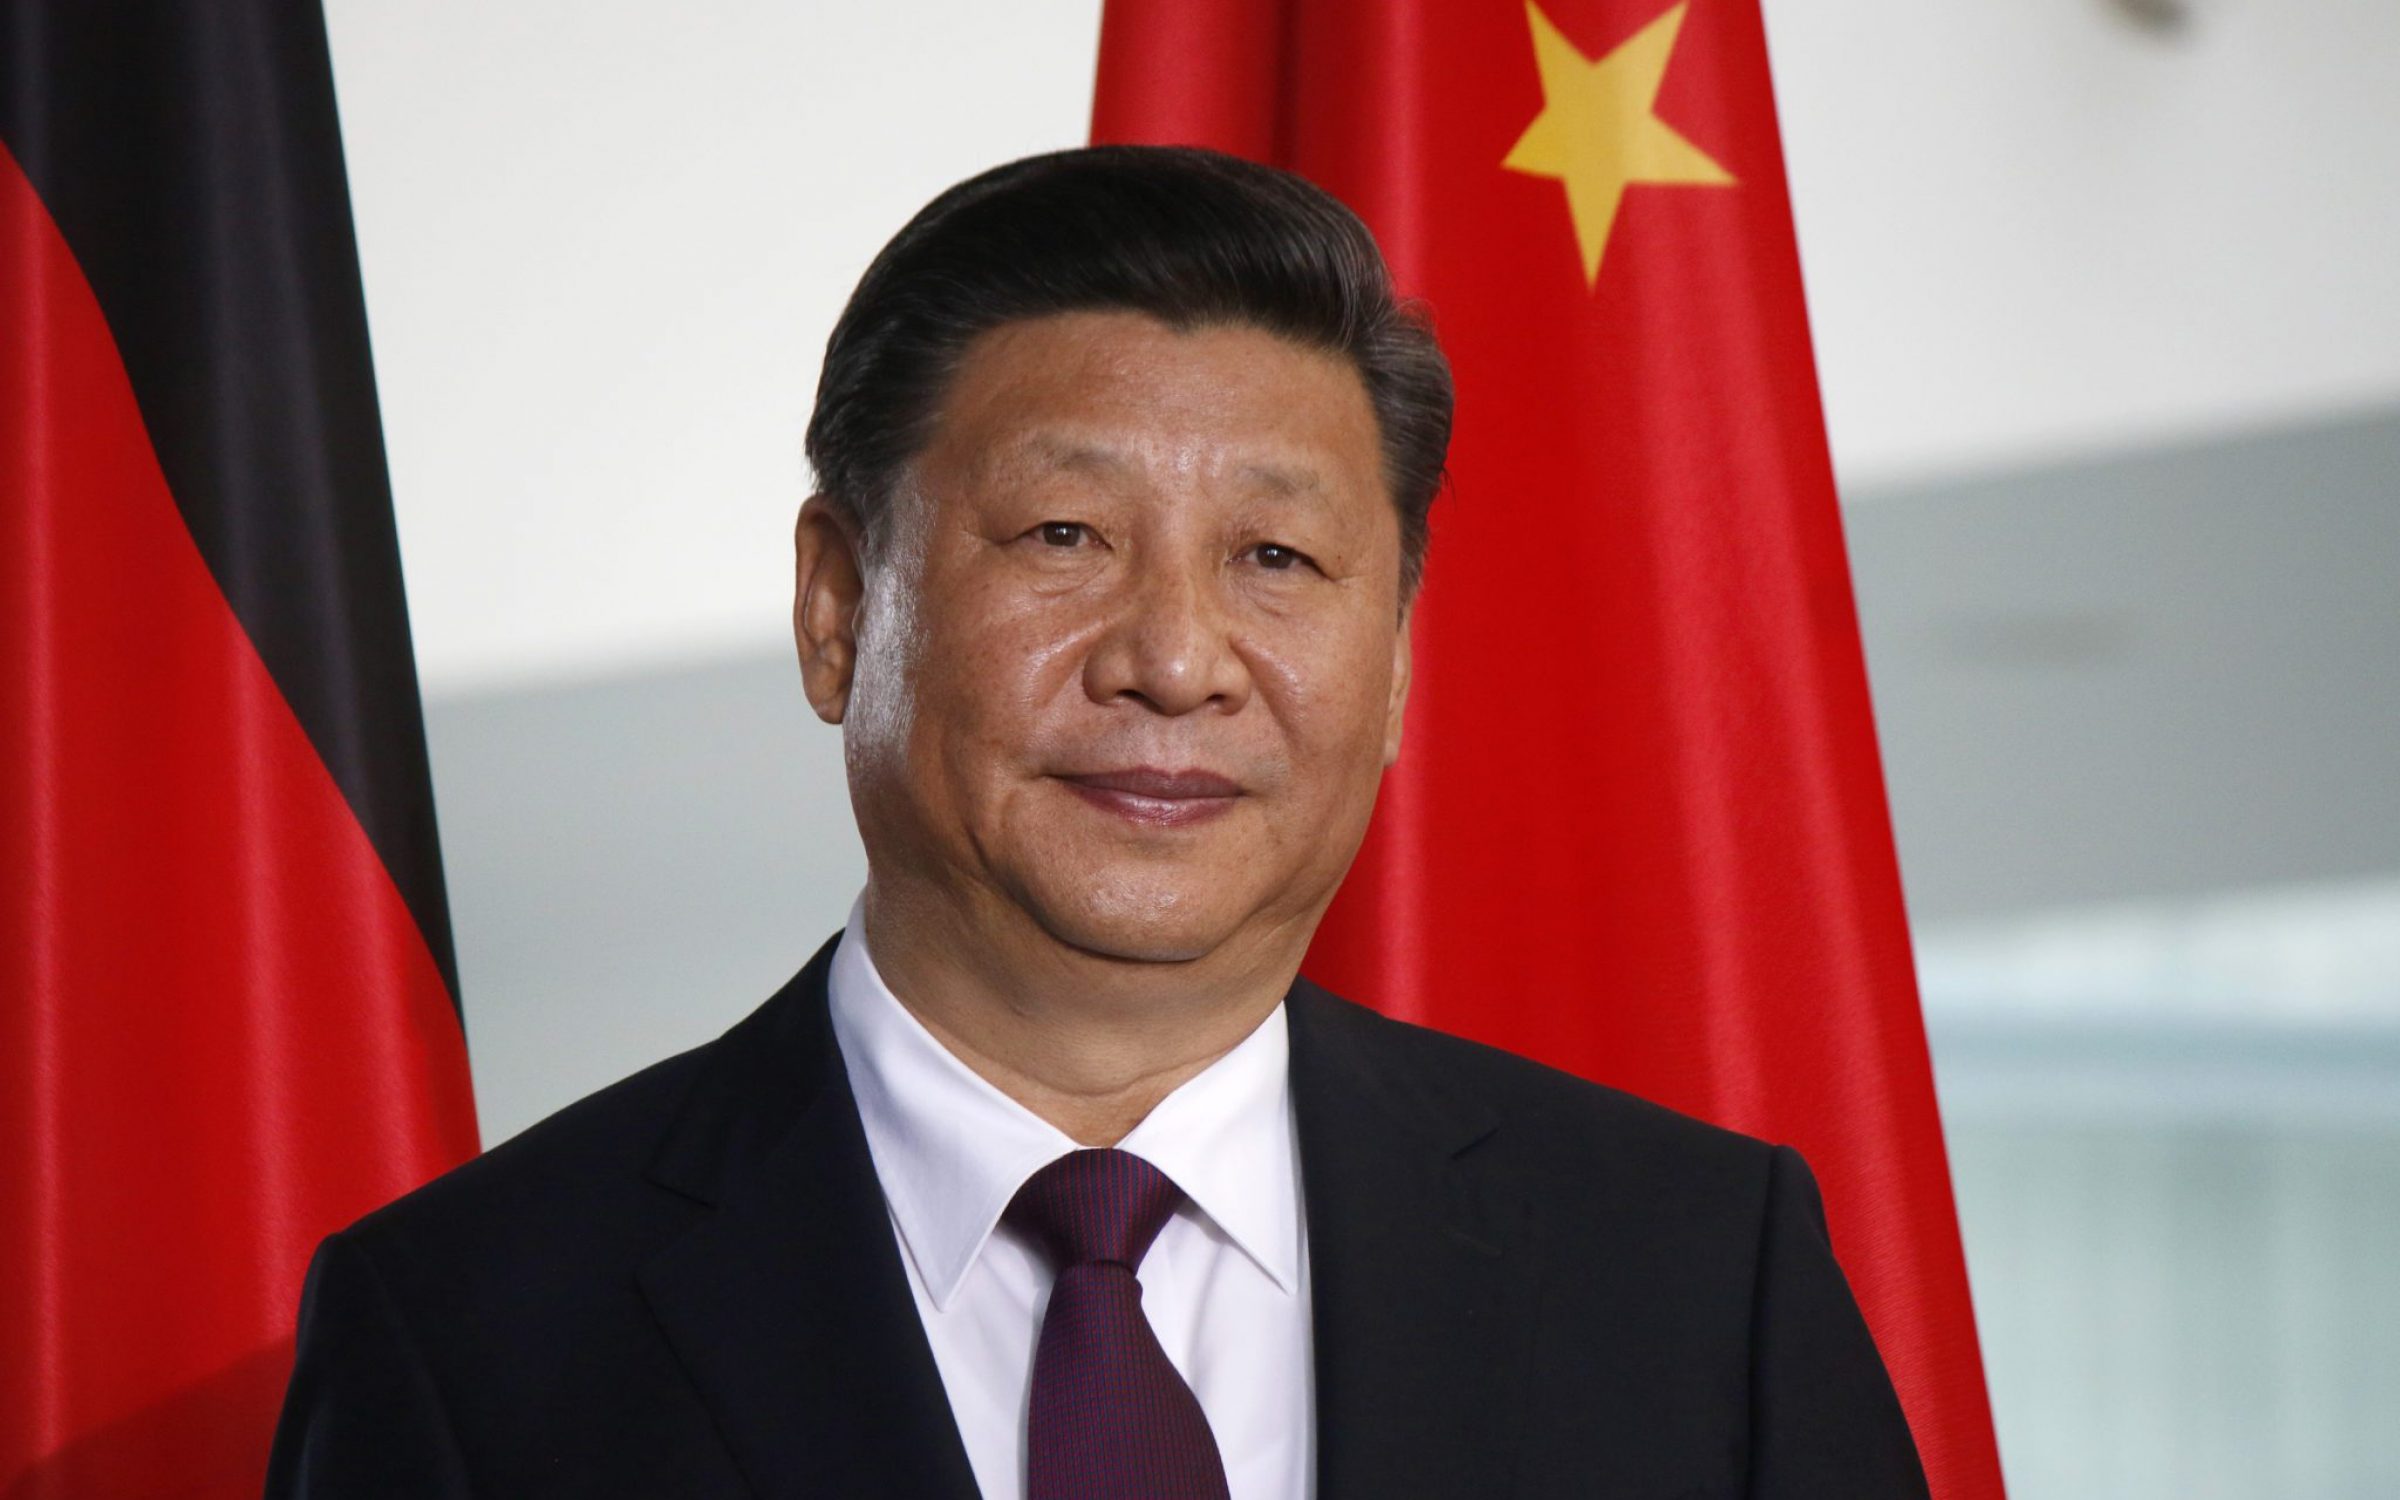 China leader President Xi Jinping at a press conference after a meeting with the German Chancellor in the Chanclery in Berlin.